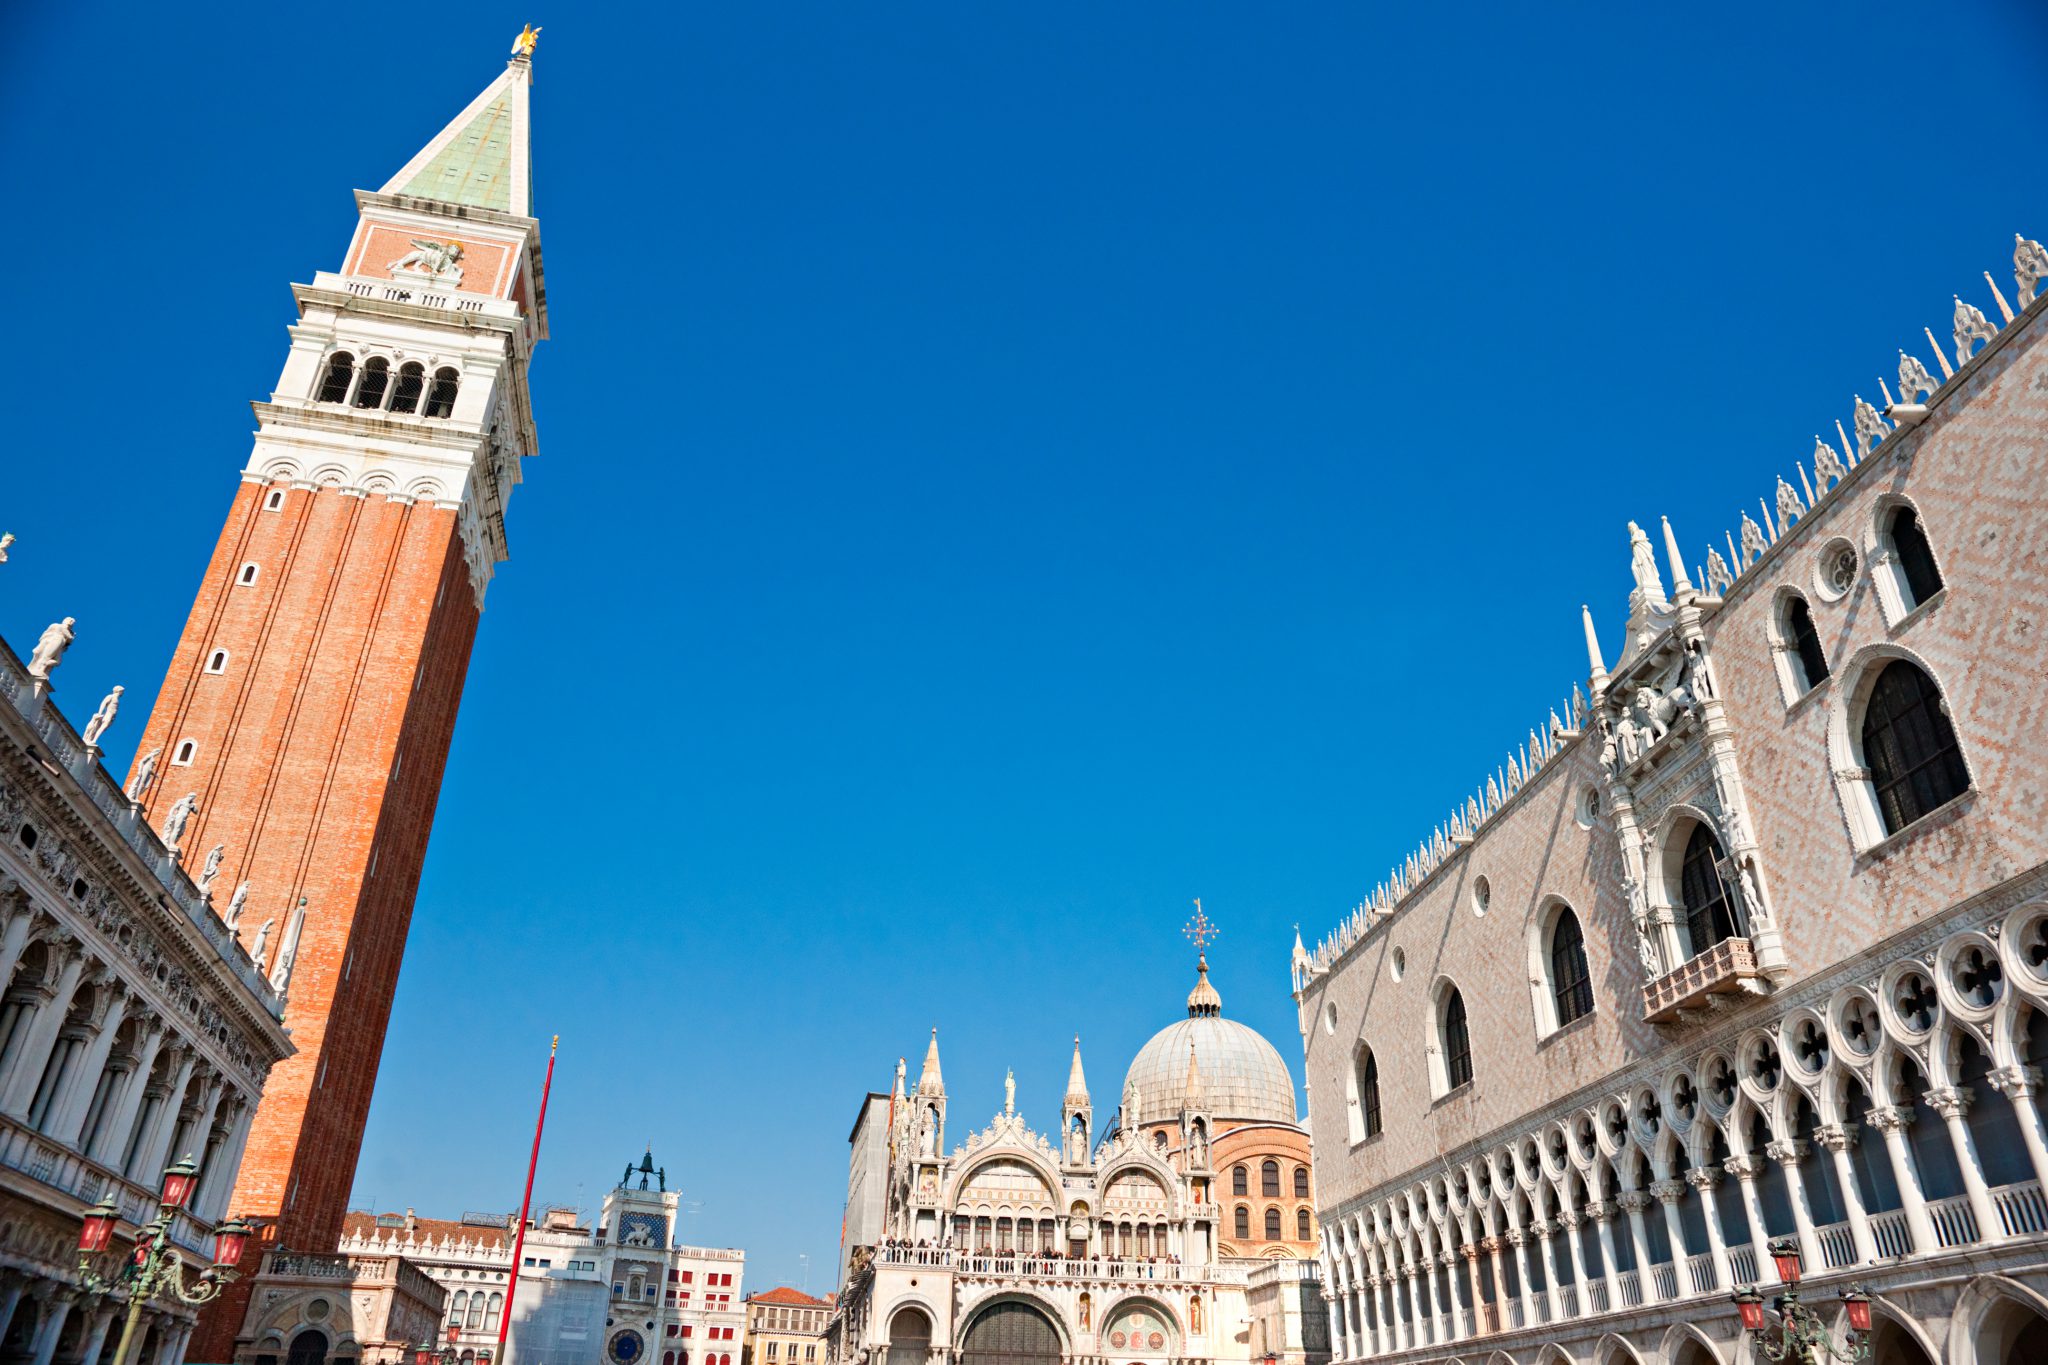 http://www.dreamstime.com/stock-image-st-marks-cathedral-venice-italy-image22150071